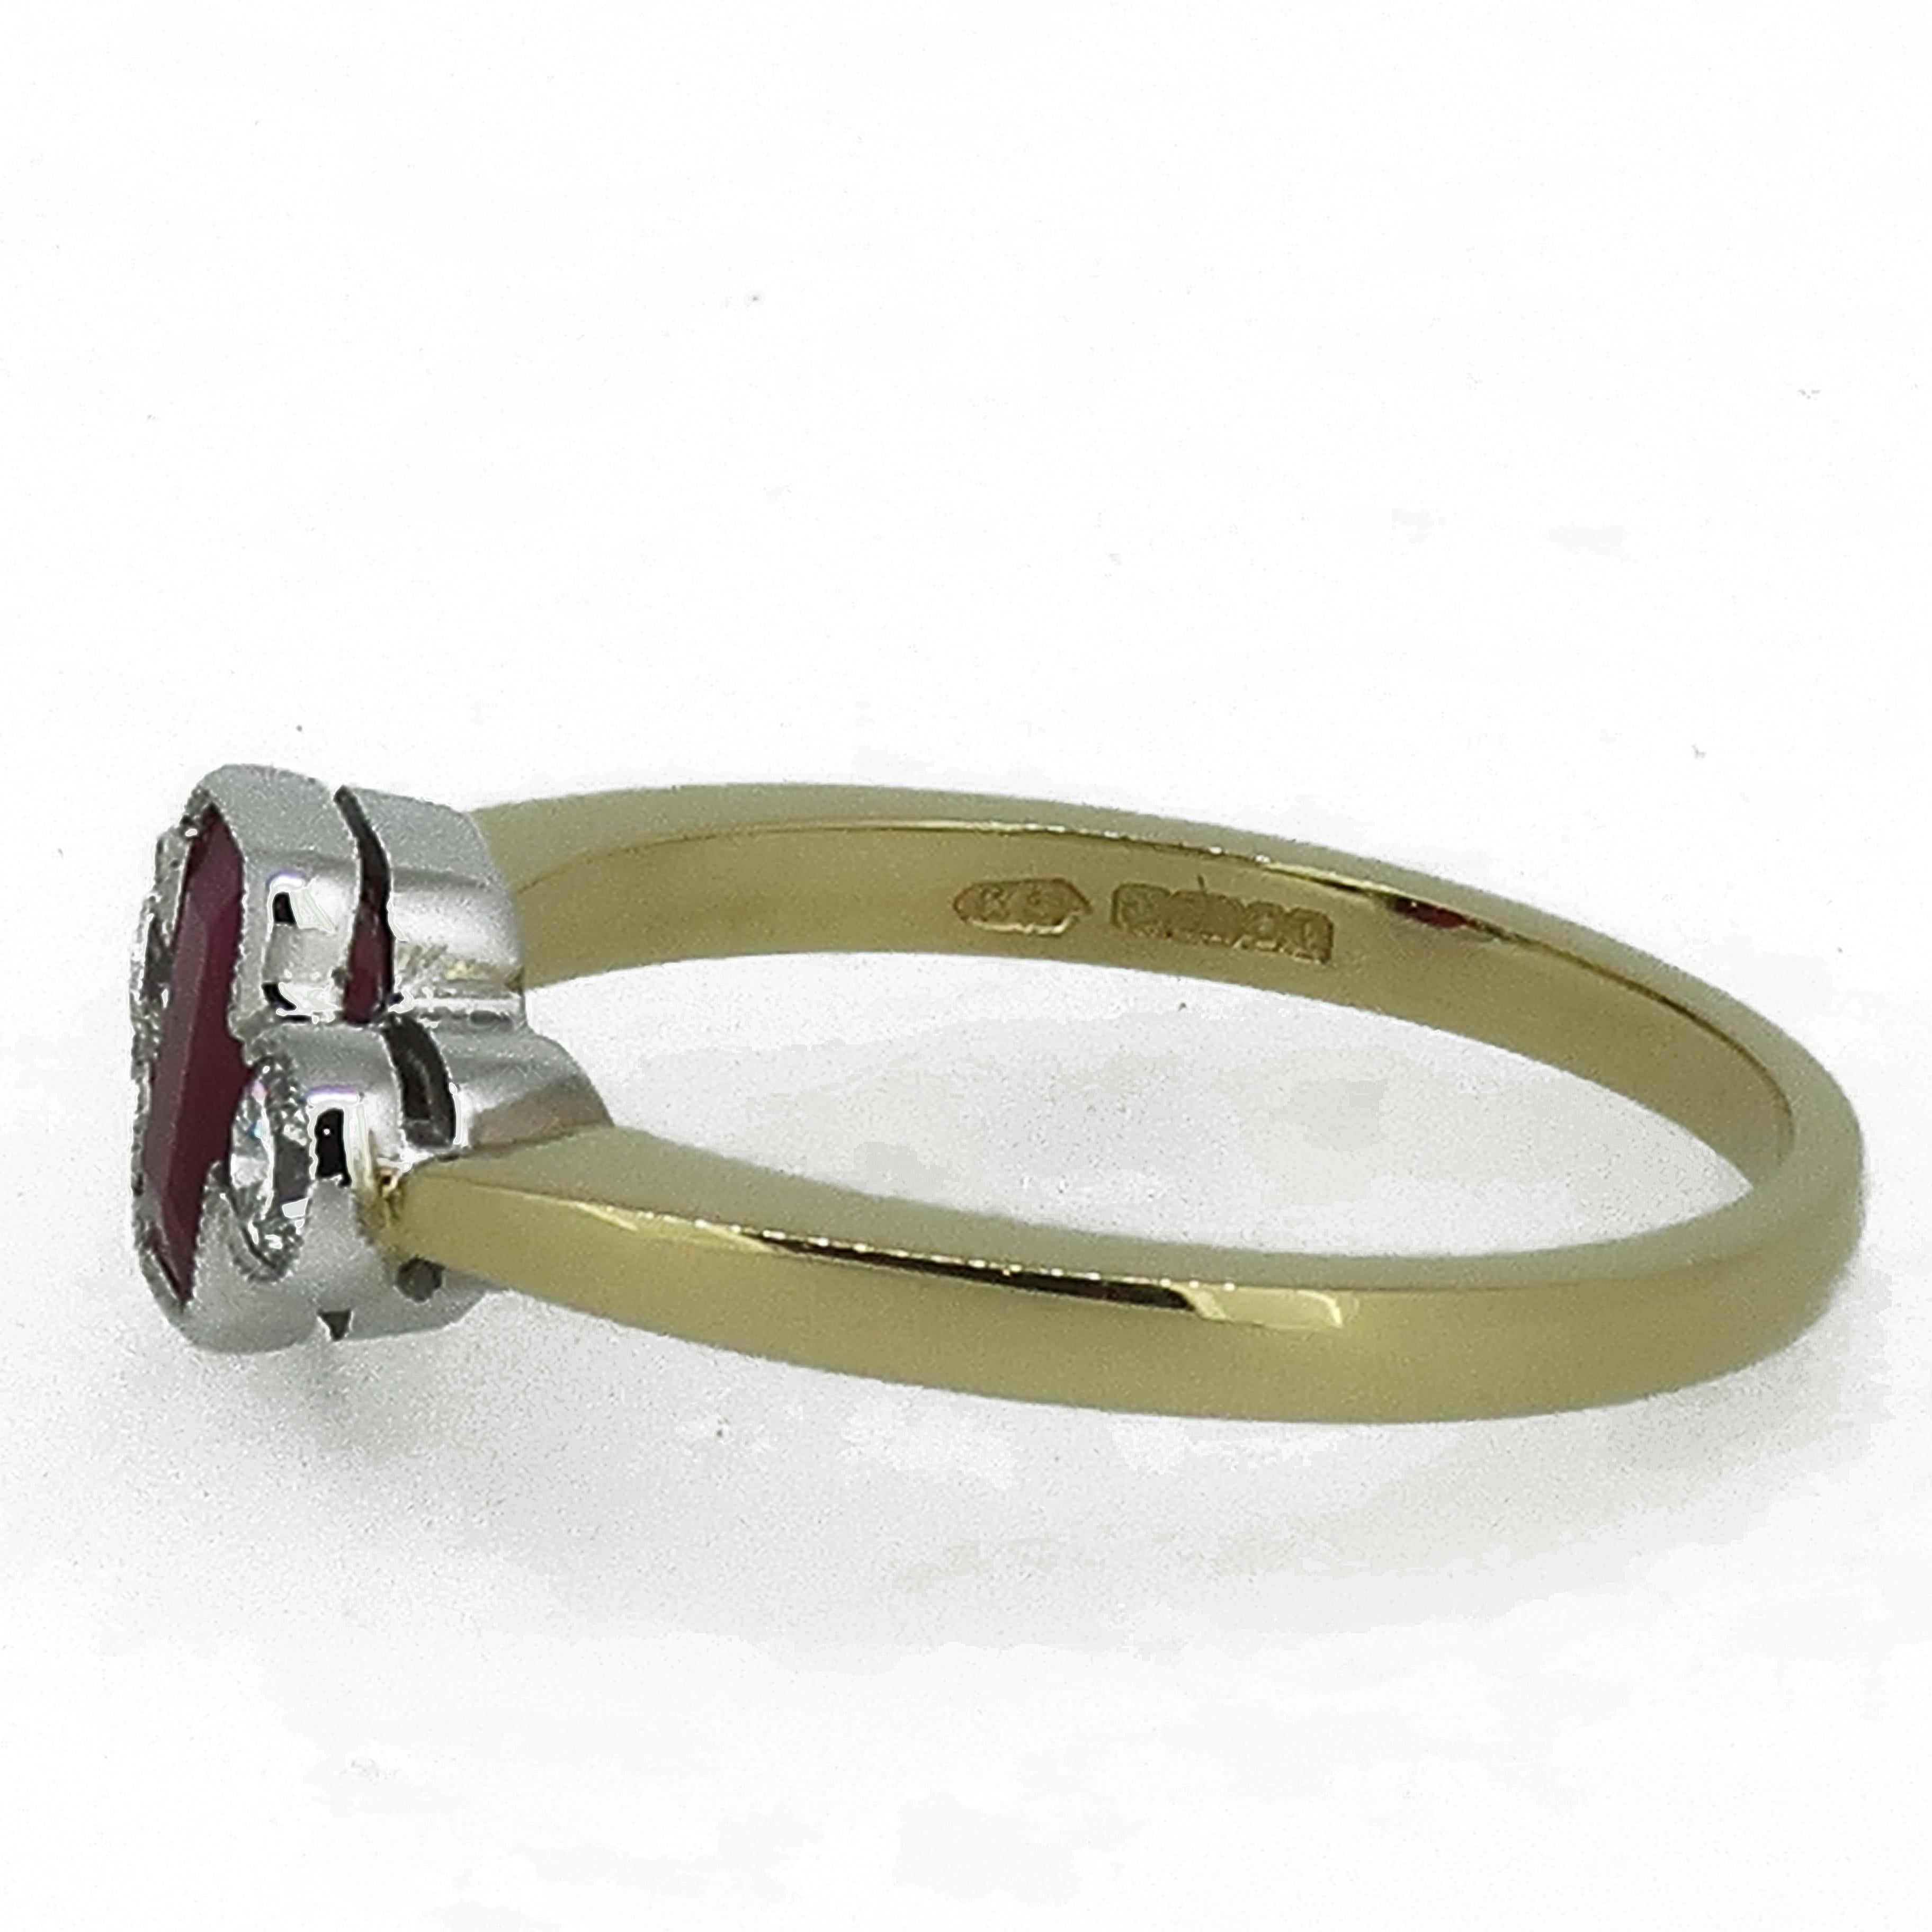 Ruby and Diamond Deco Style Three Stone Ring 18 Karat Yellow & White Gold

A dainty but dazzling Art Deco style ruby & diamond 3 stone ring. Central emerald cut ruby flanked by a brilliant cut diamond either side encased in a fine 18 carat white